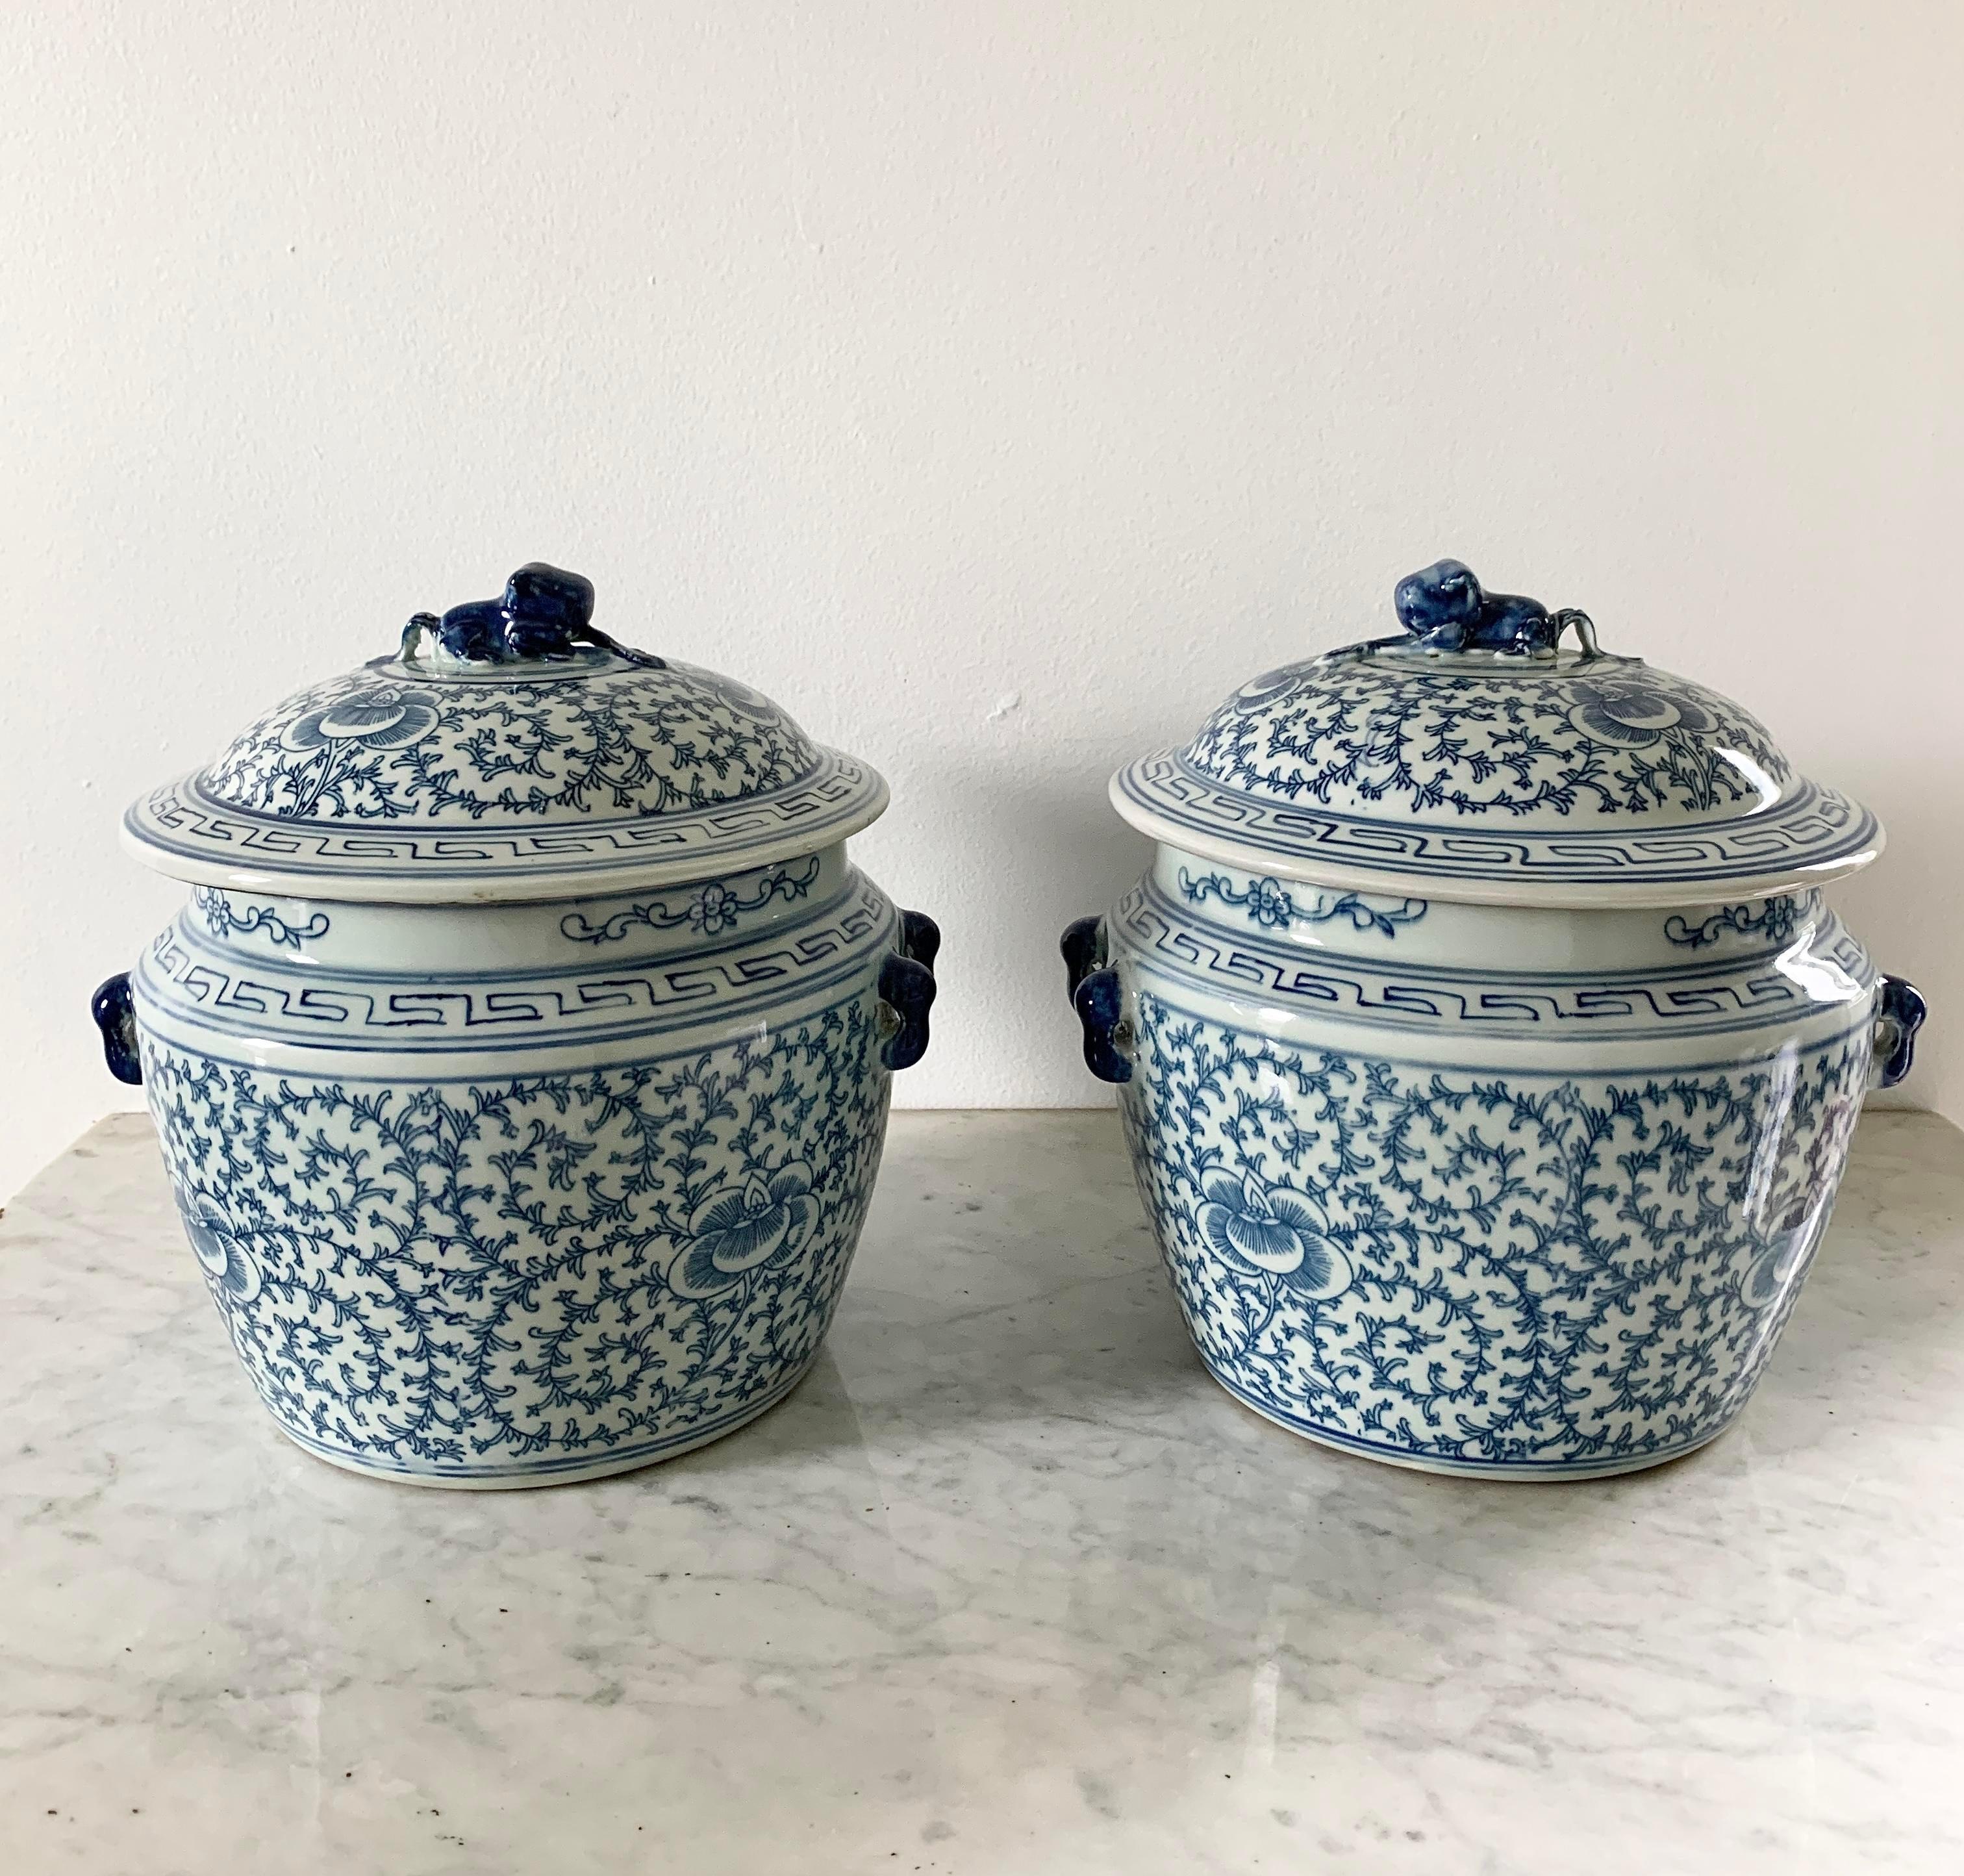 A stunning pair of blue & white porcelain Chinoiserie covered jars with foo dog finials

China, 20th century

Measures: 9.5